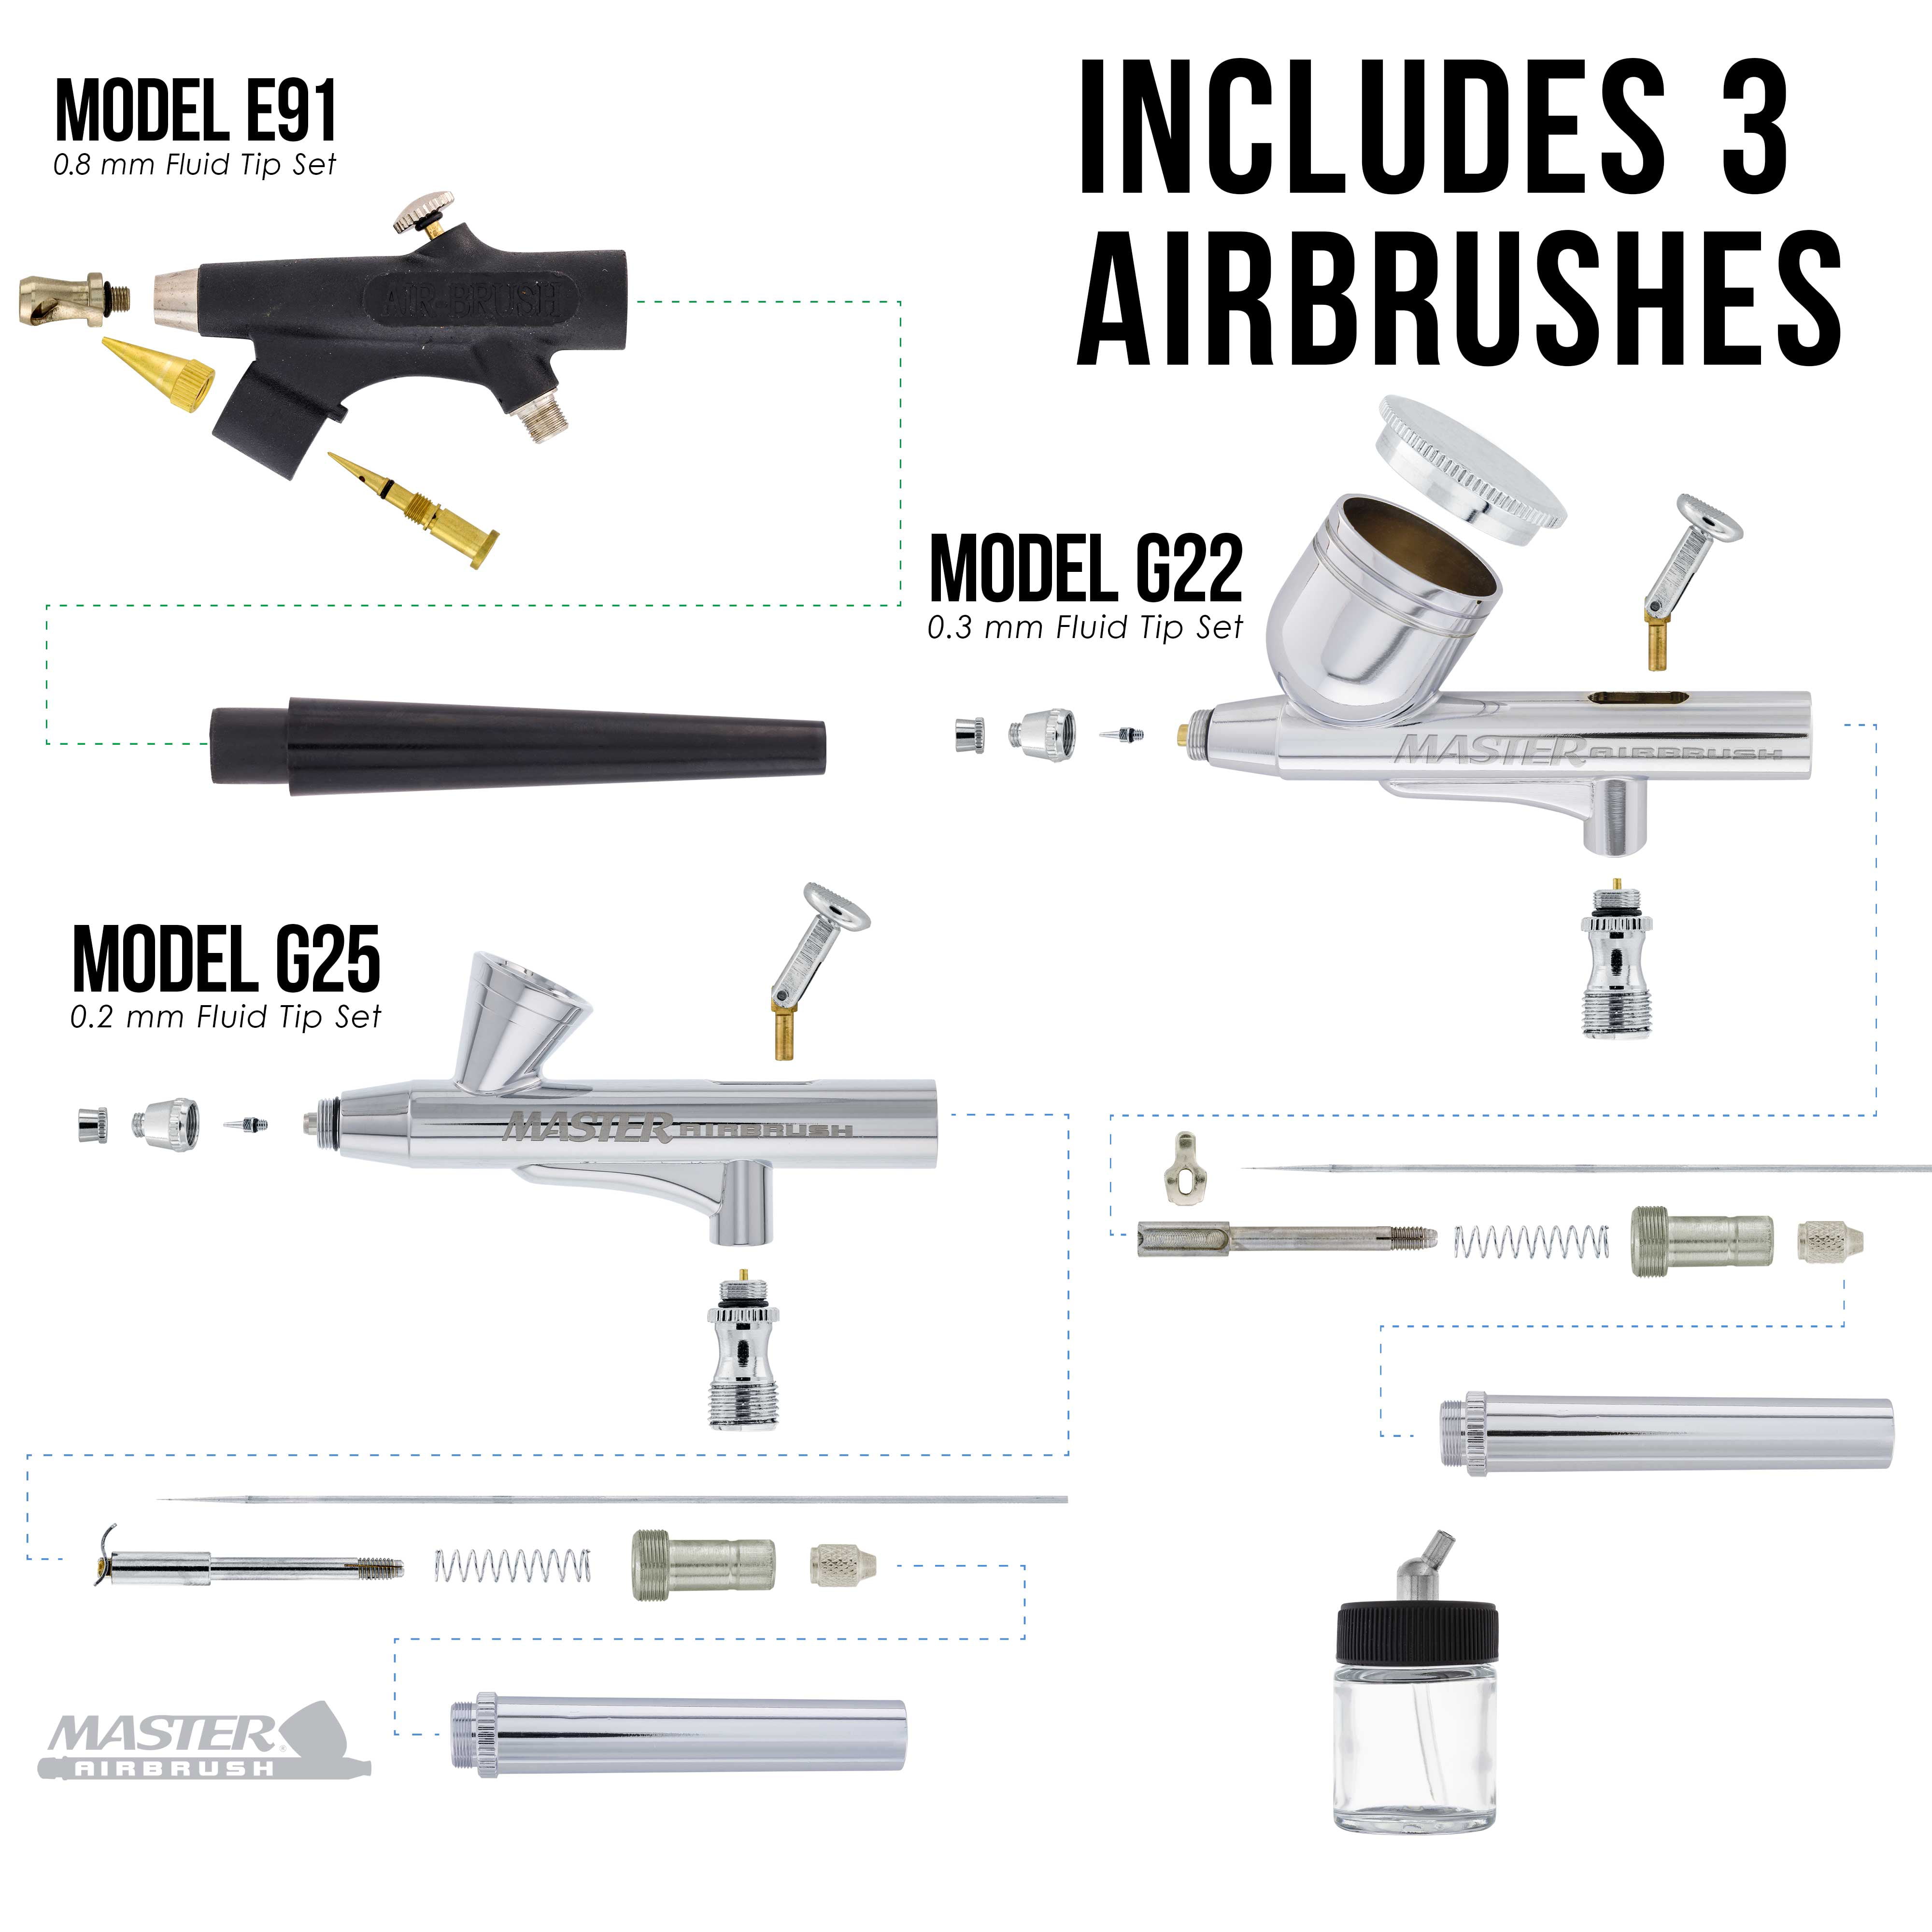 Airbrushes & accessories for sale : r/airbrush